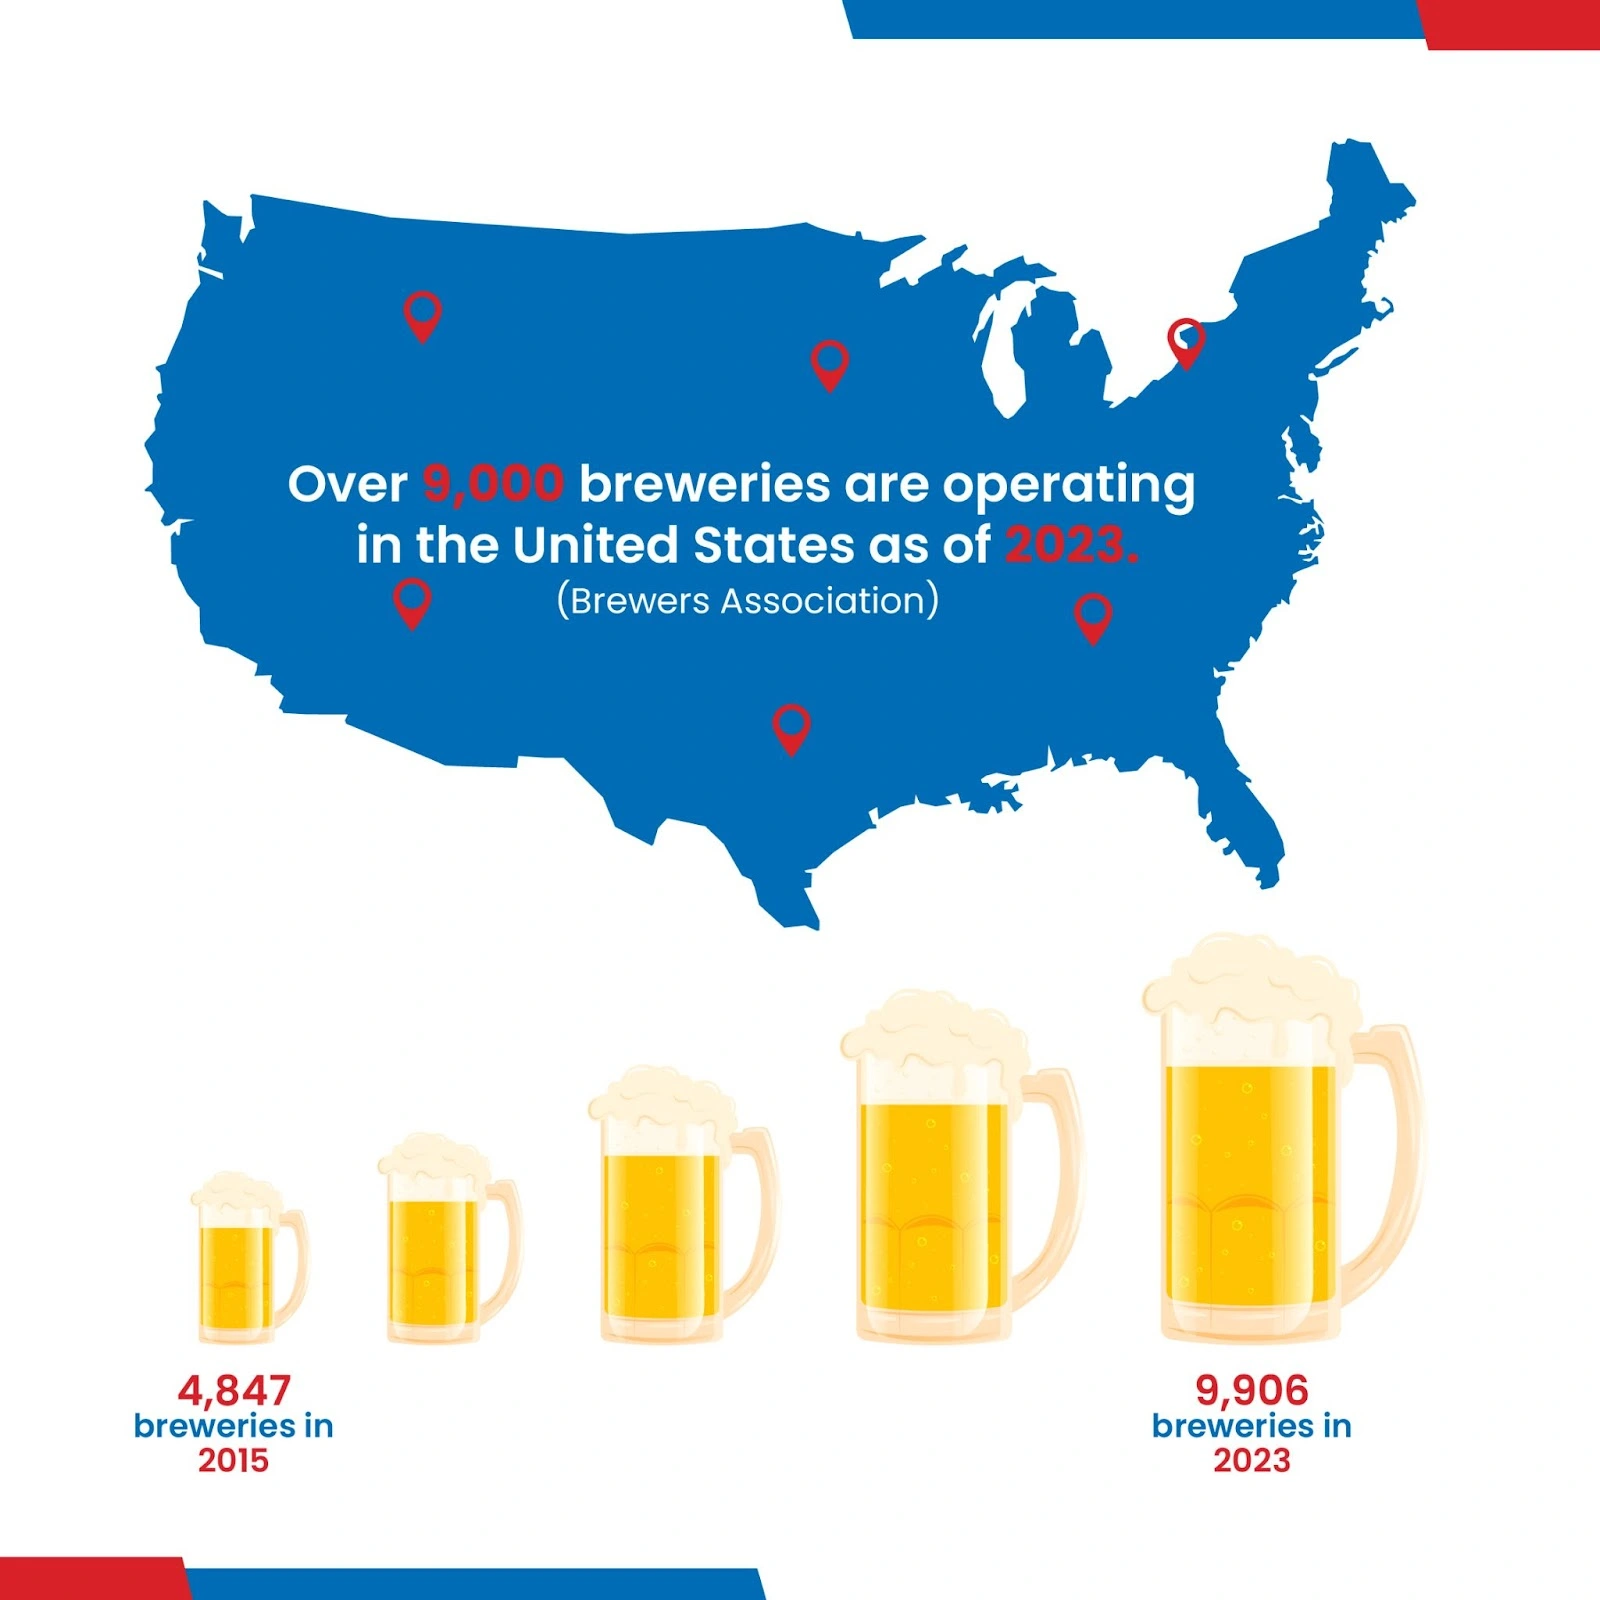  some general statistics across breweries and the distribution of breweries in the United States Region